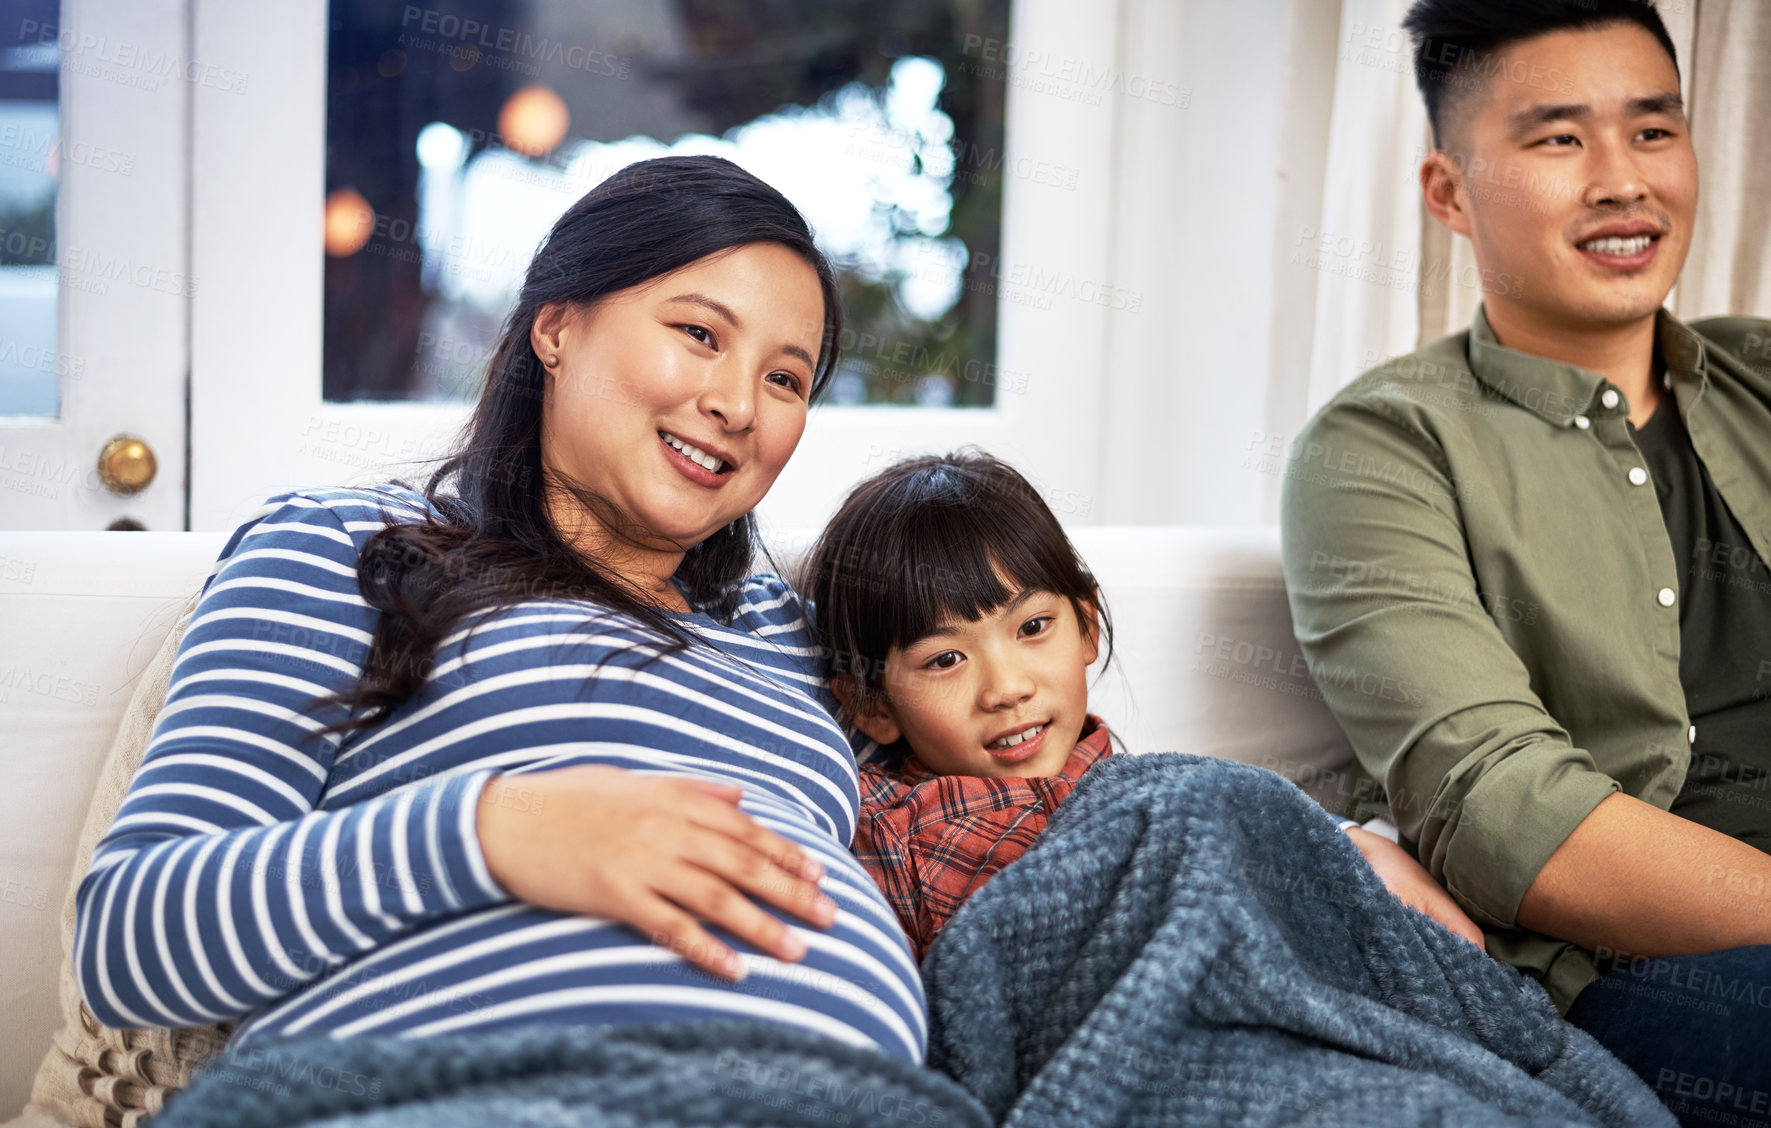 Buy stock photo Shot of a family watching television together at home